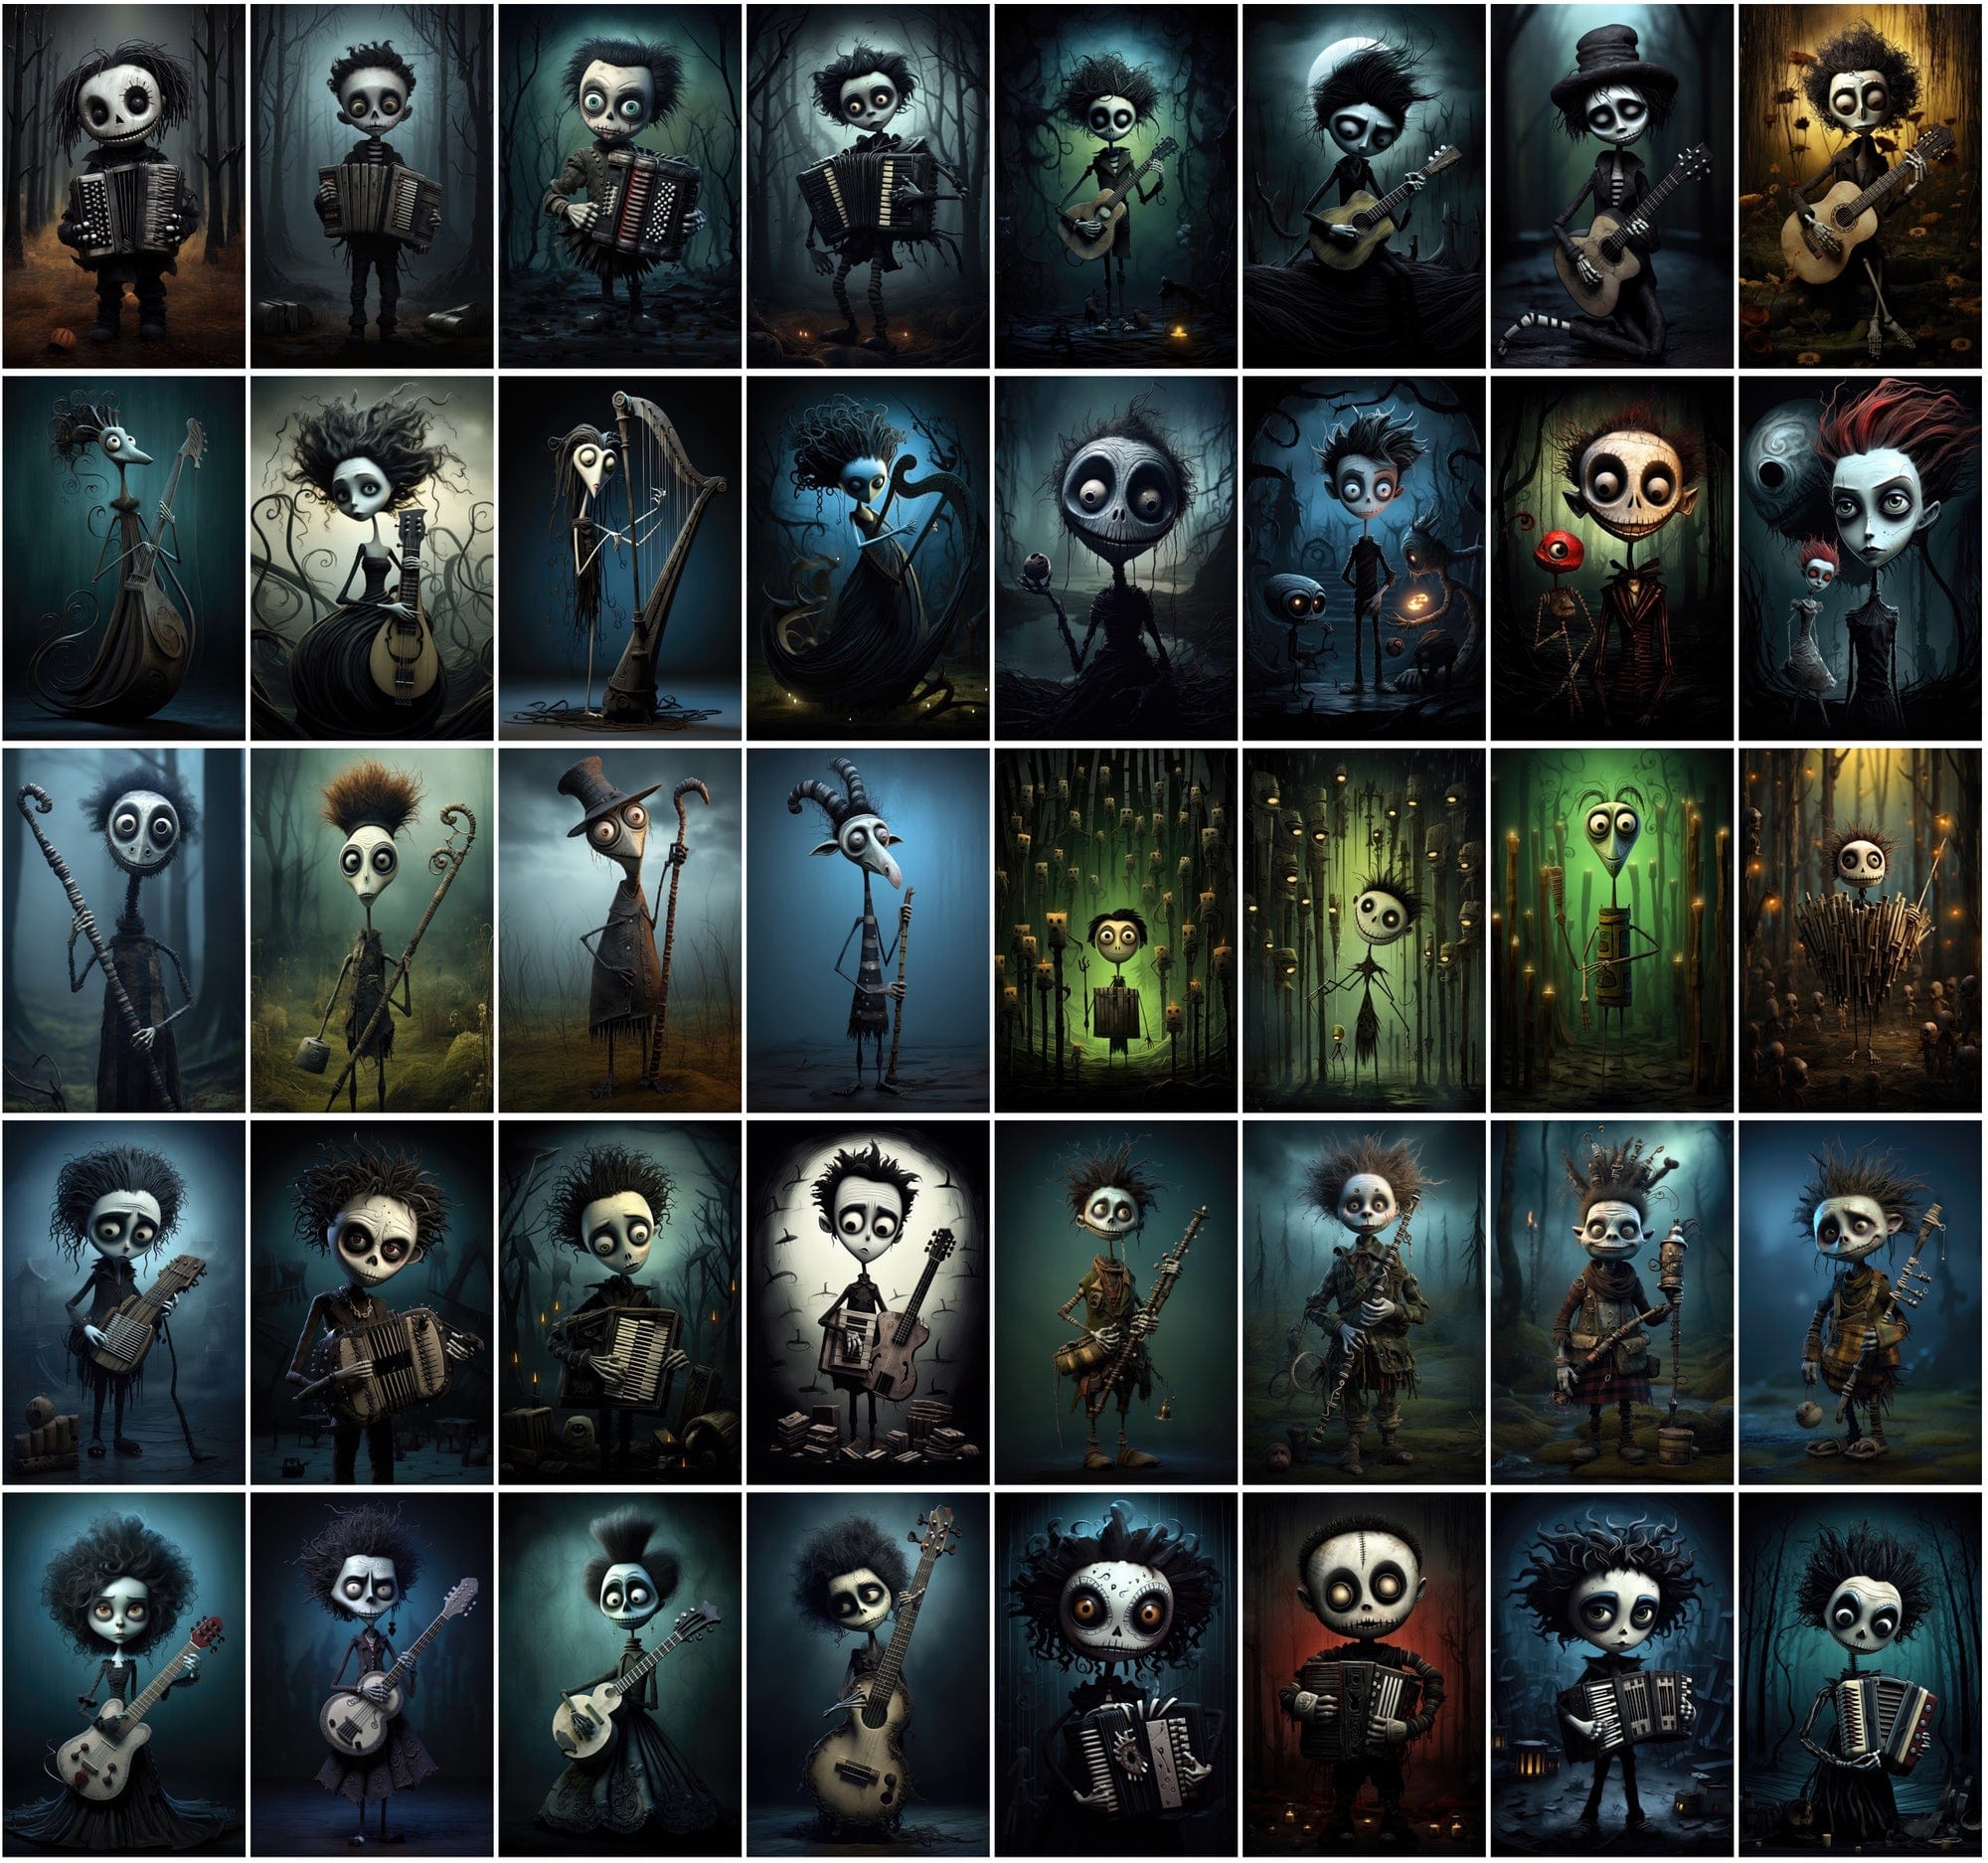 580 Dark & Dreamy Characters with Musical Instruments - Unique Wall Art Digital Download Sumobundle